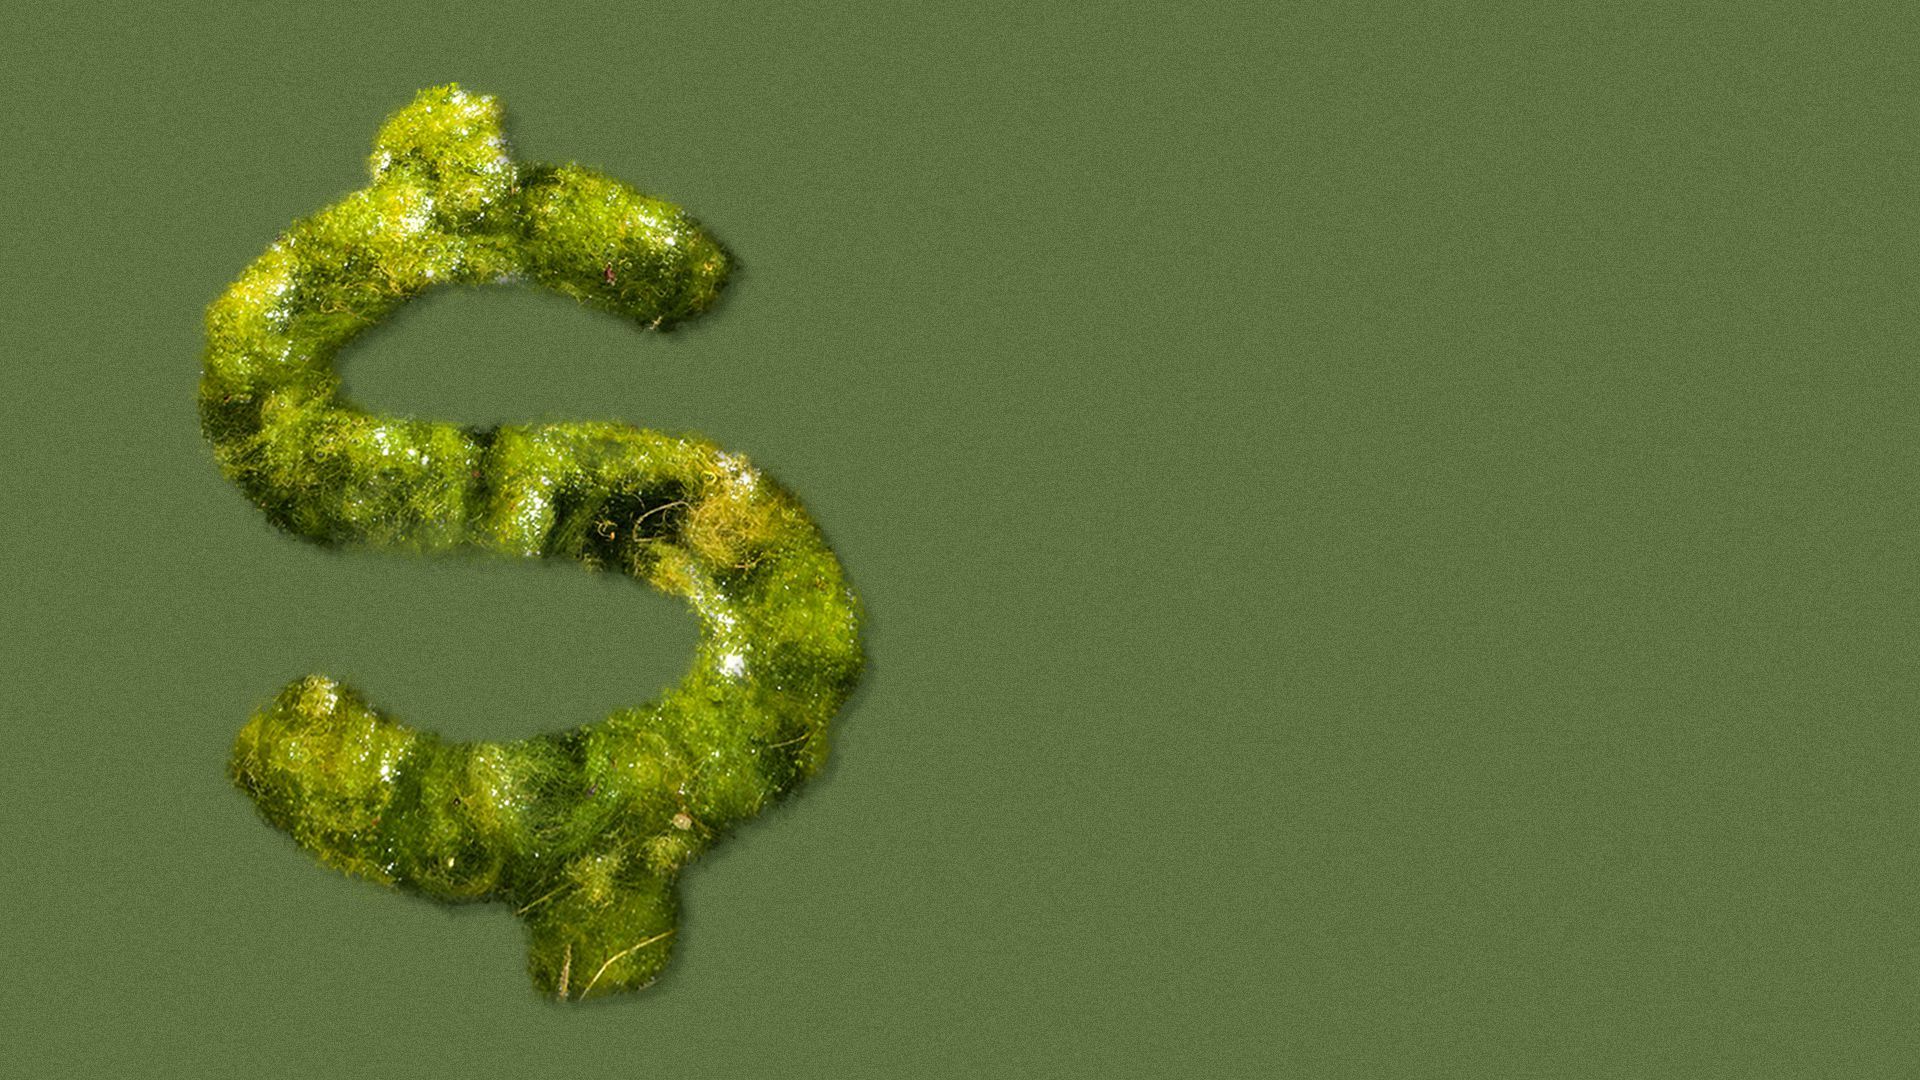 Illustration of algae forming the shape of a dollar sign.